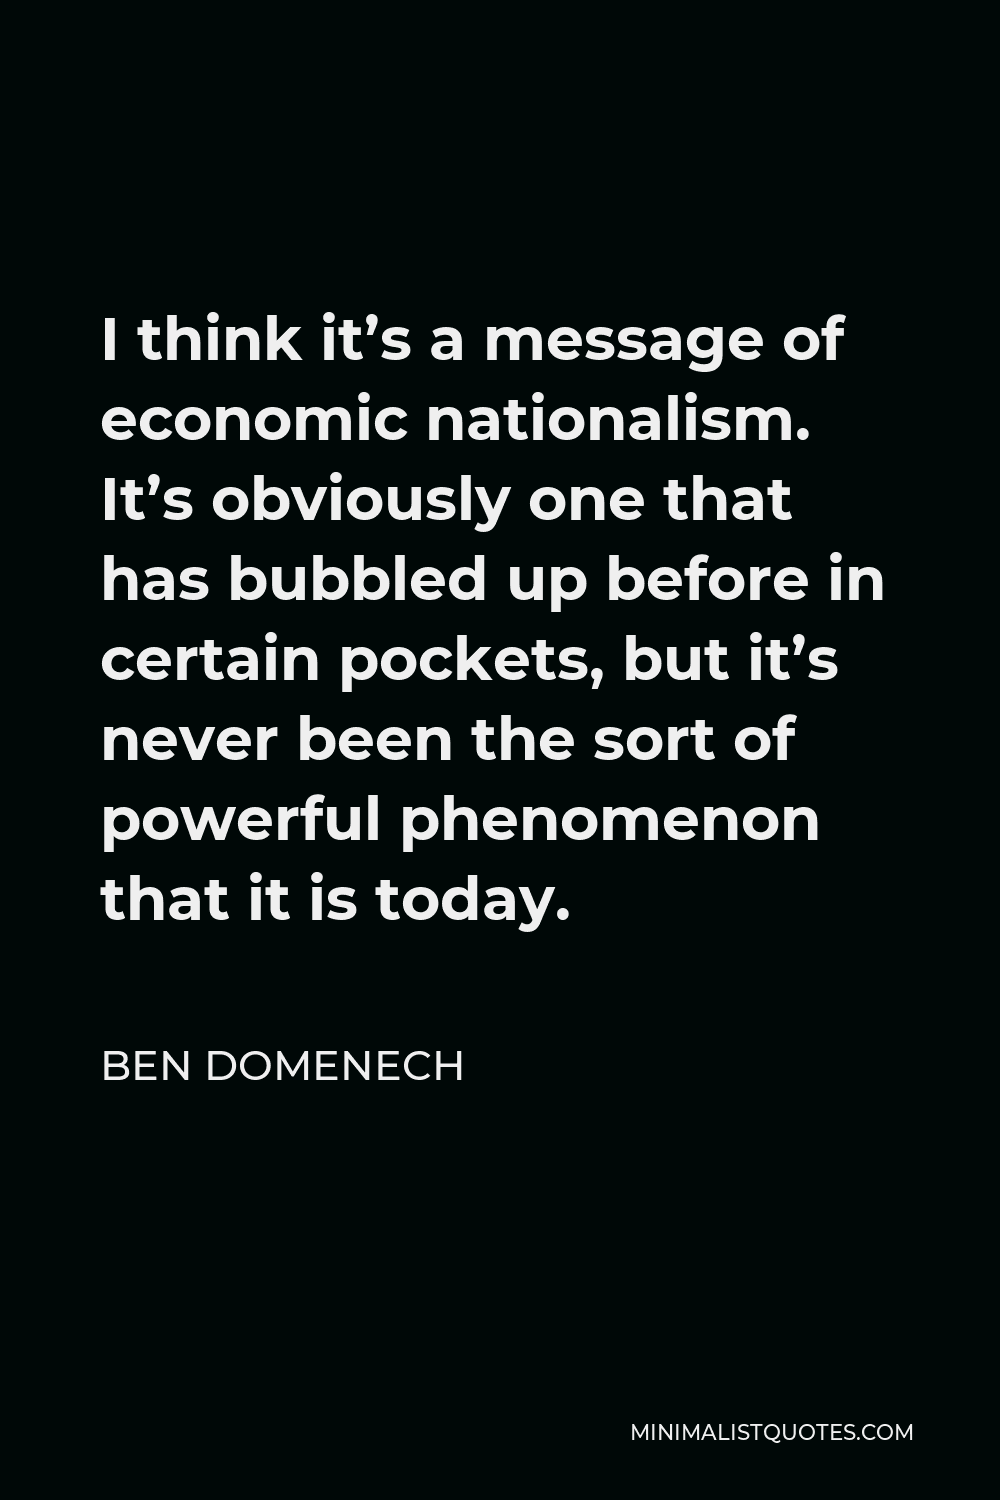 Ben Domenech Quote - I think it’s a message of economic nationalism. It’s obviously one that has bubbled up before in certain pockets, but it’s never been the sort of powerful phenomenon that it is today.